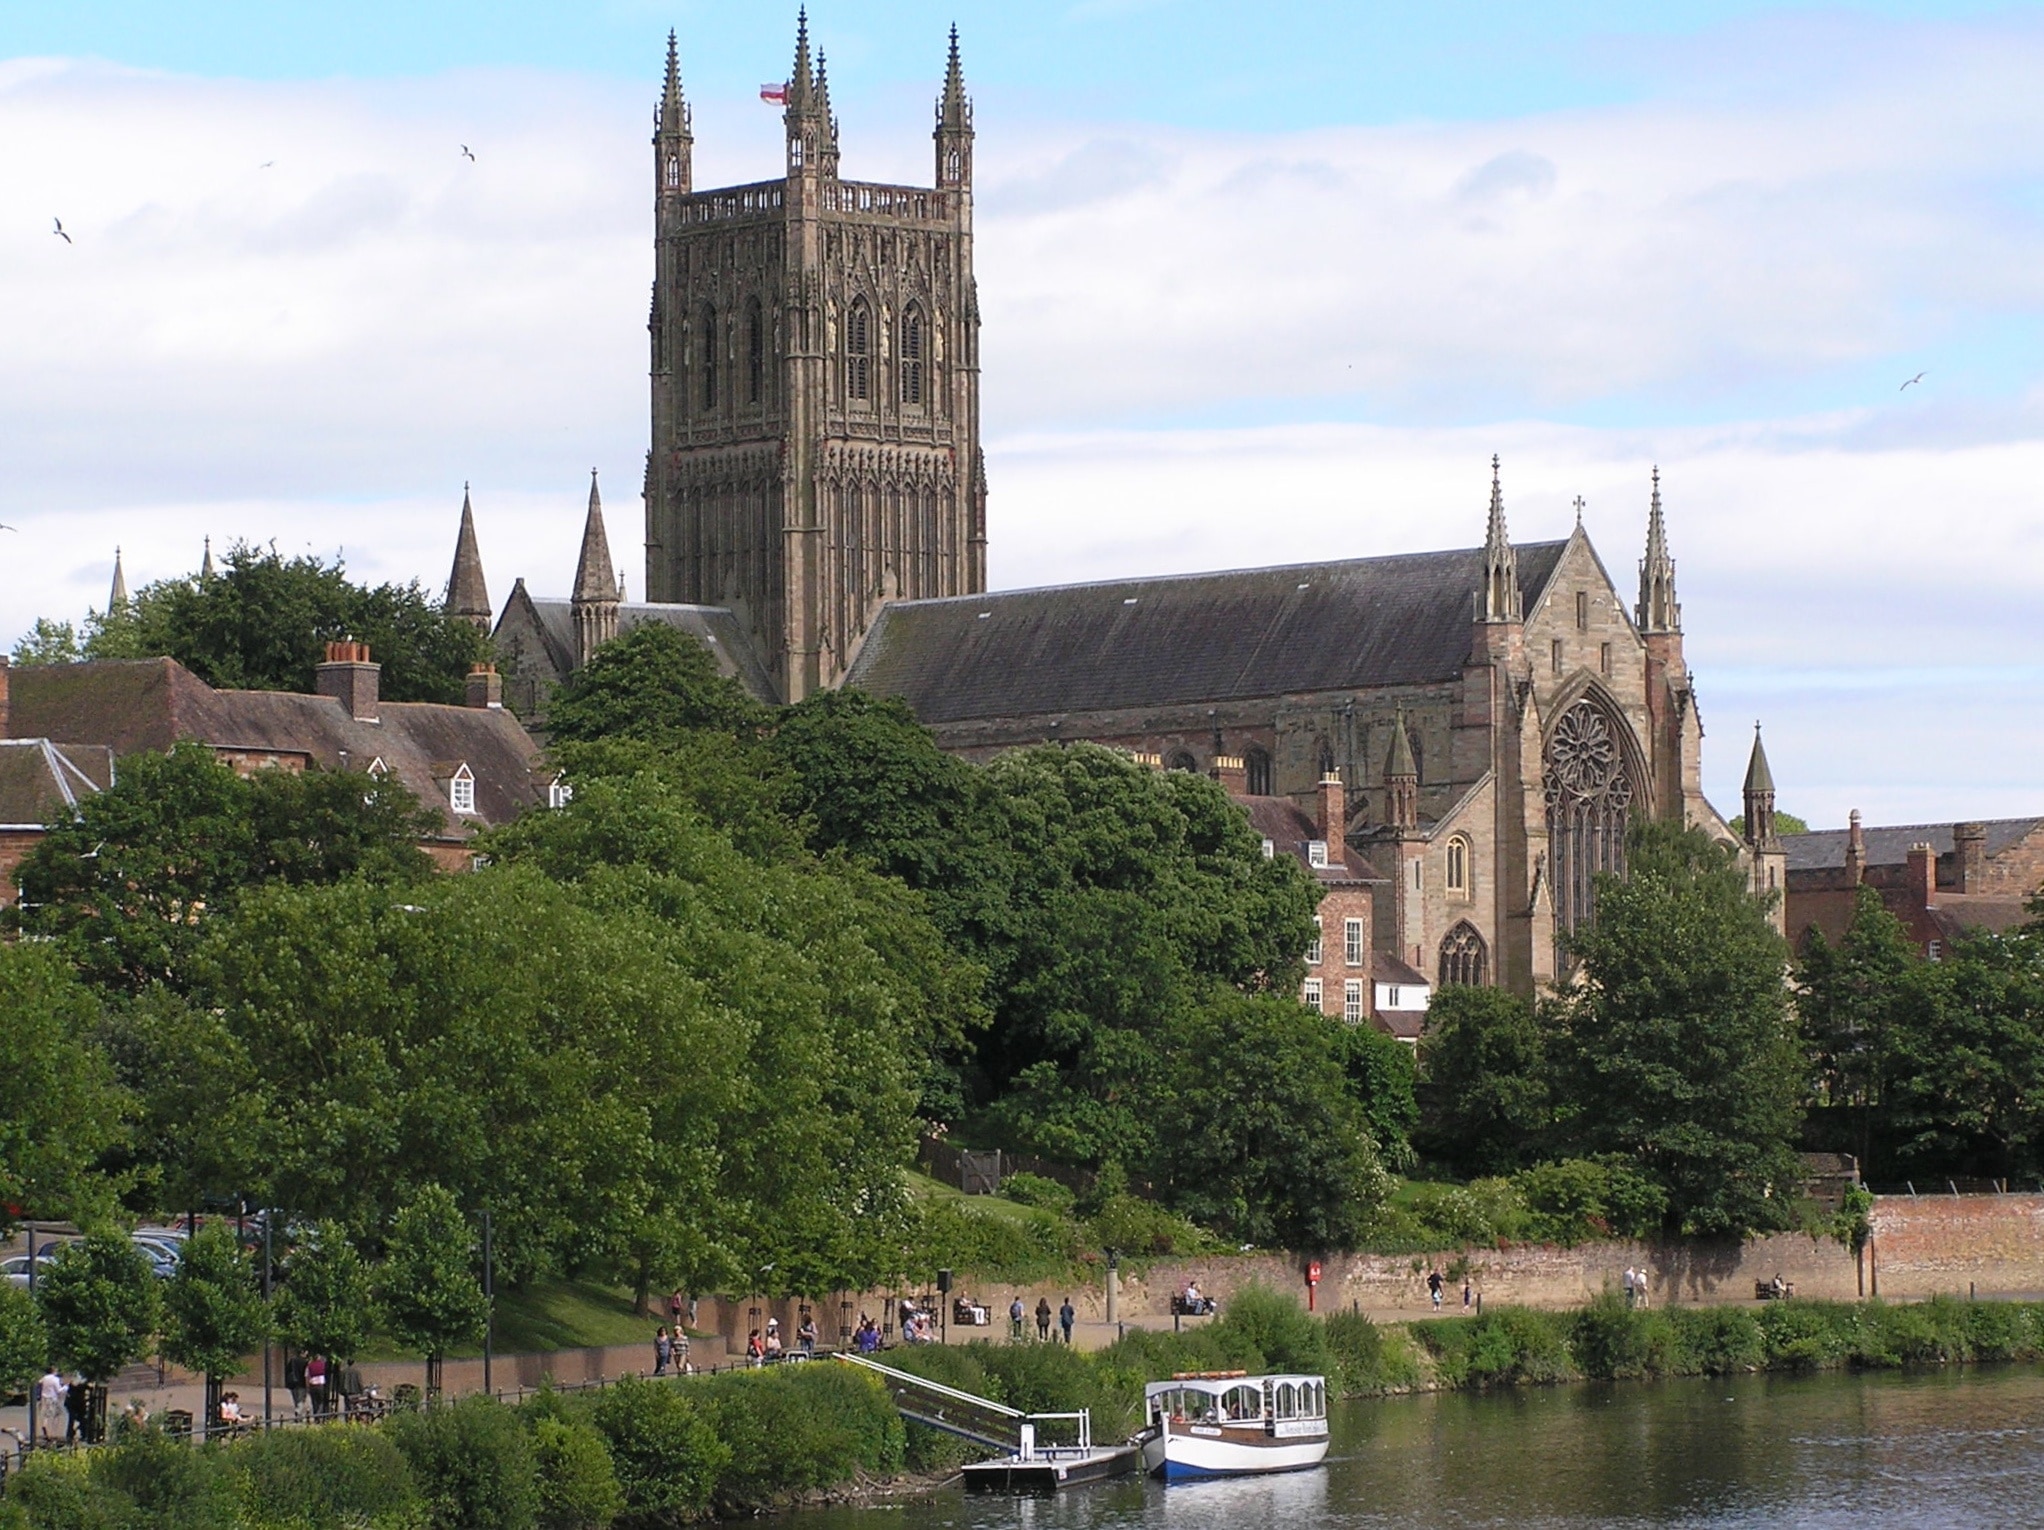 A view of the Cathedral in the City of Worcester from the town bridge across the River Severn